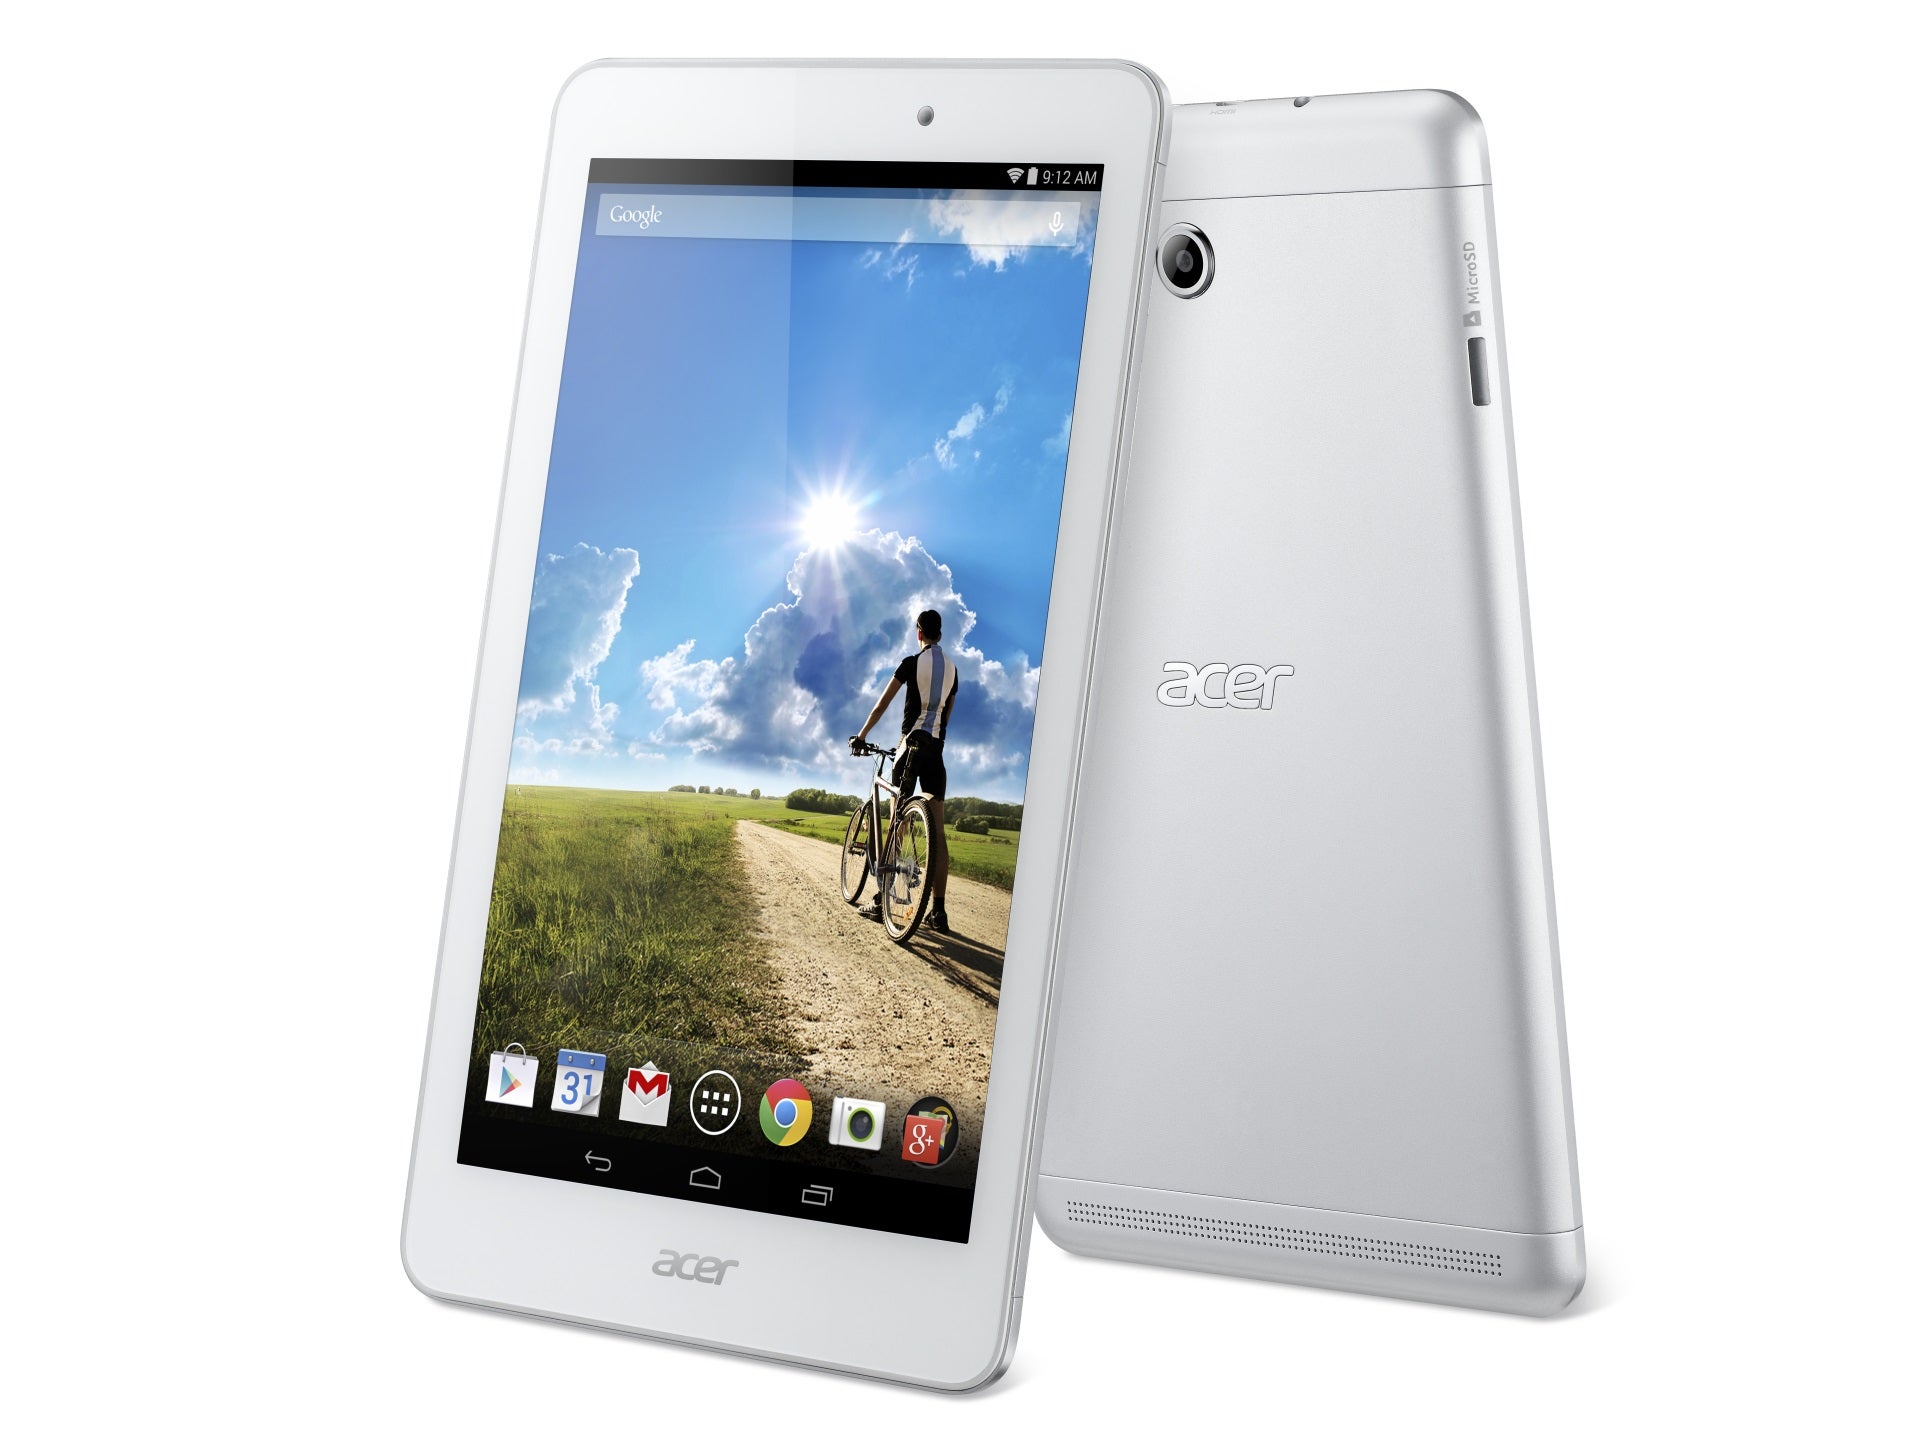 Acer Iconia Tab 8 - Acer announces five new smartphones, an 8-inch tablet, and a smart-band